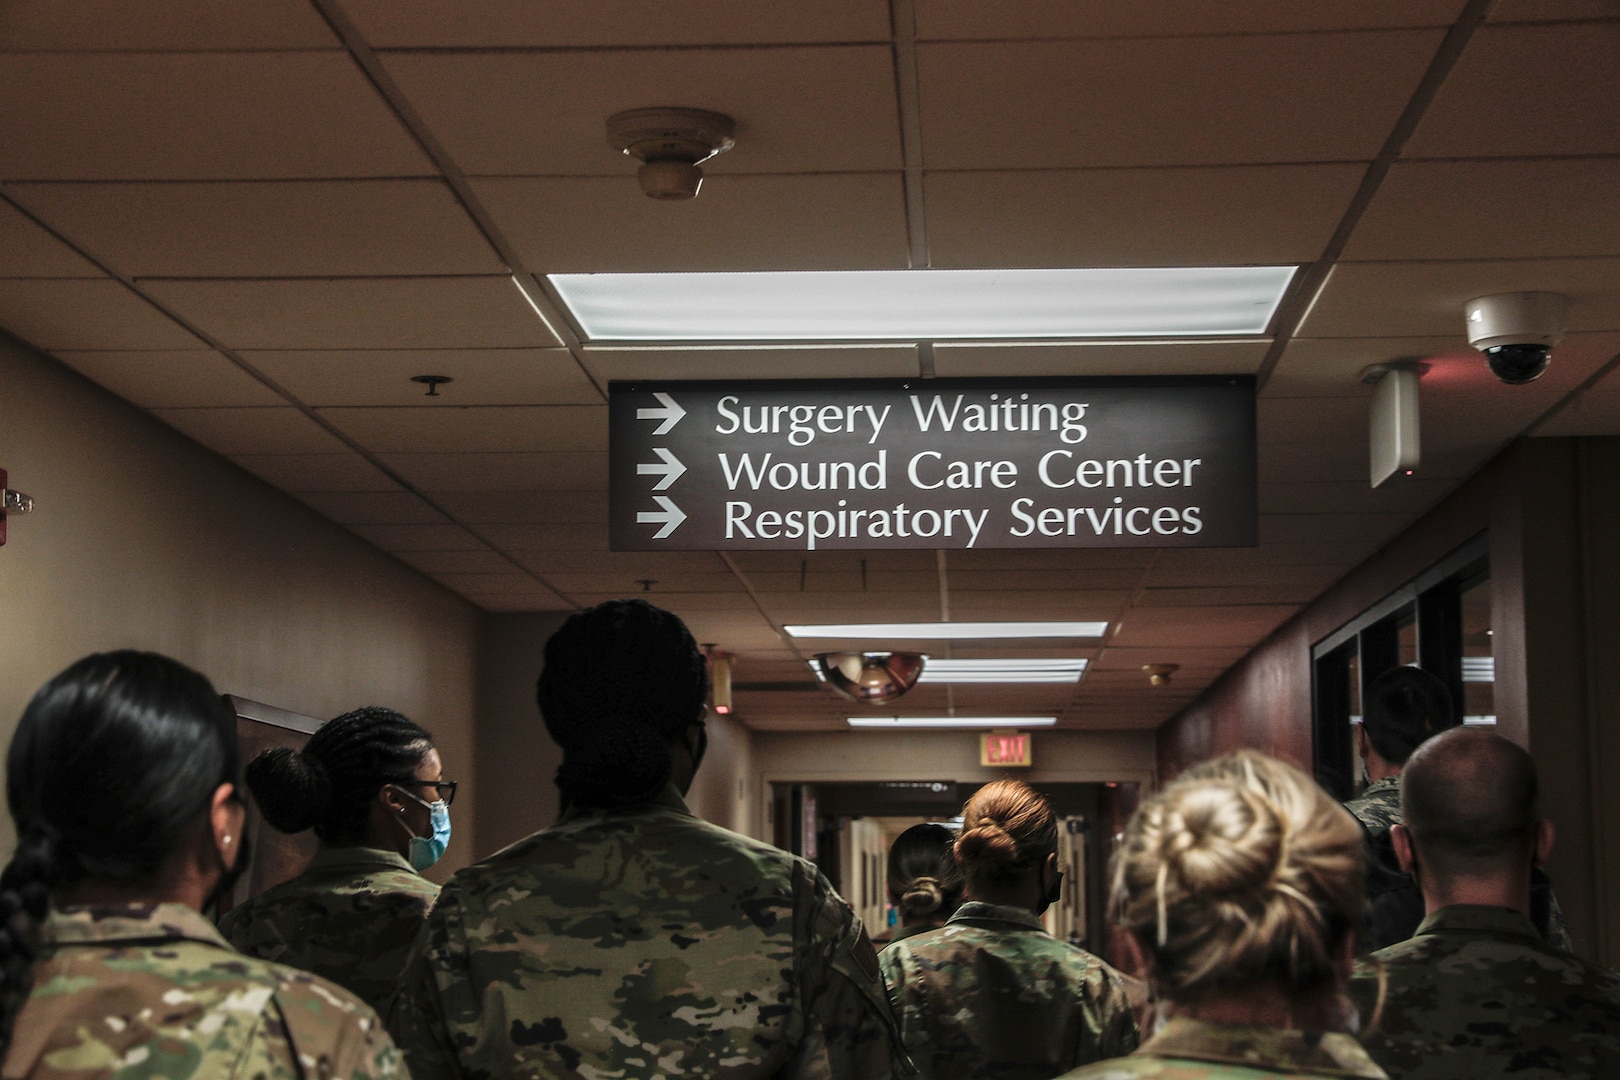 U.S. Airmen from Brooke Medical Center, San Antonio, Texas and Kessler Medical Center, Biloxi, Miss., assigned to U.S. Army North Task Force 46, get a tour of Kingman Regional Medical Center as part of in-processing at KRMC, Kingman, Ariz., March 2, 2021.